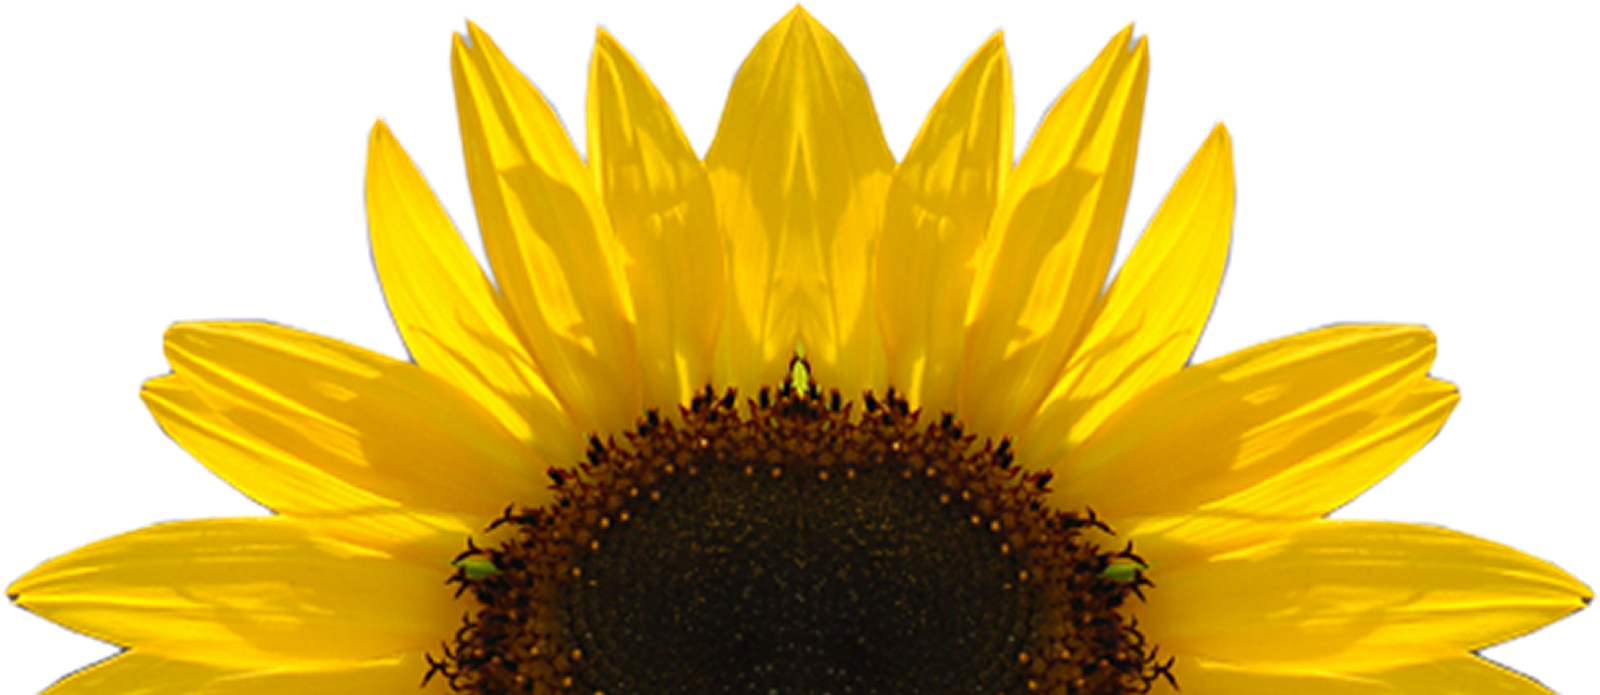 Sunflower Free Sunflower Clipart Half Pencil And In - Transparent Sunflower - Png Download (1600x695), Png Download